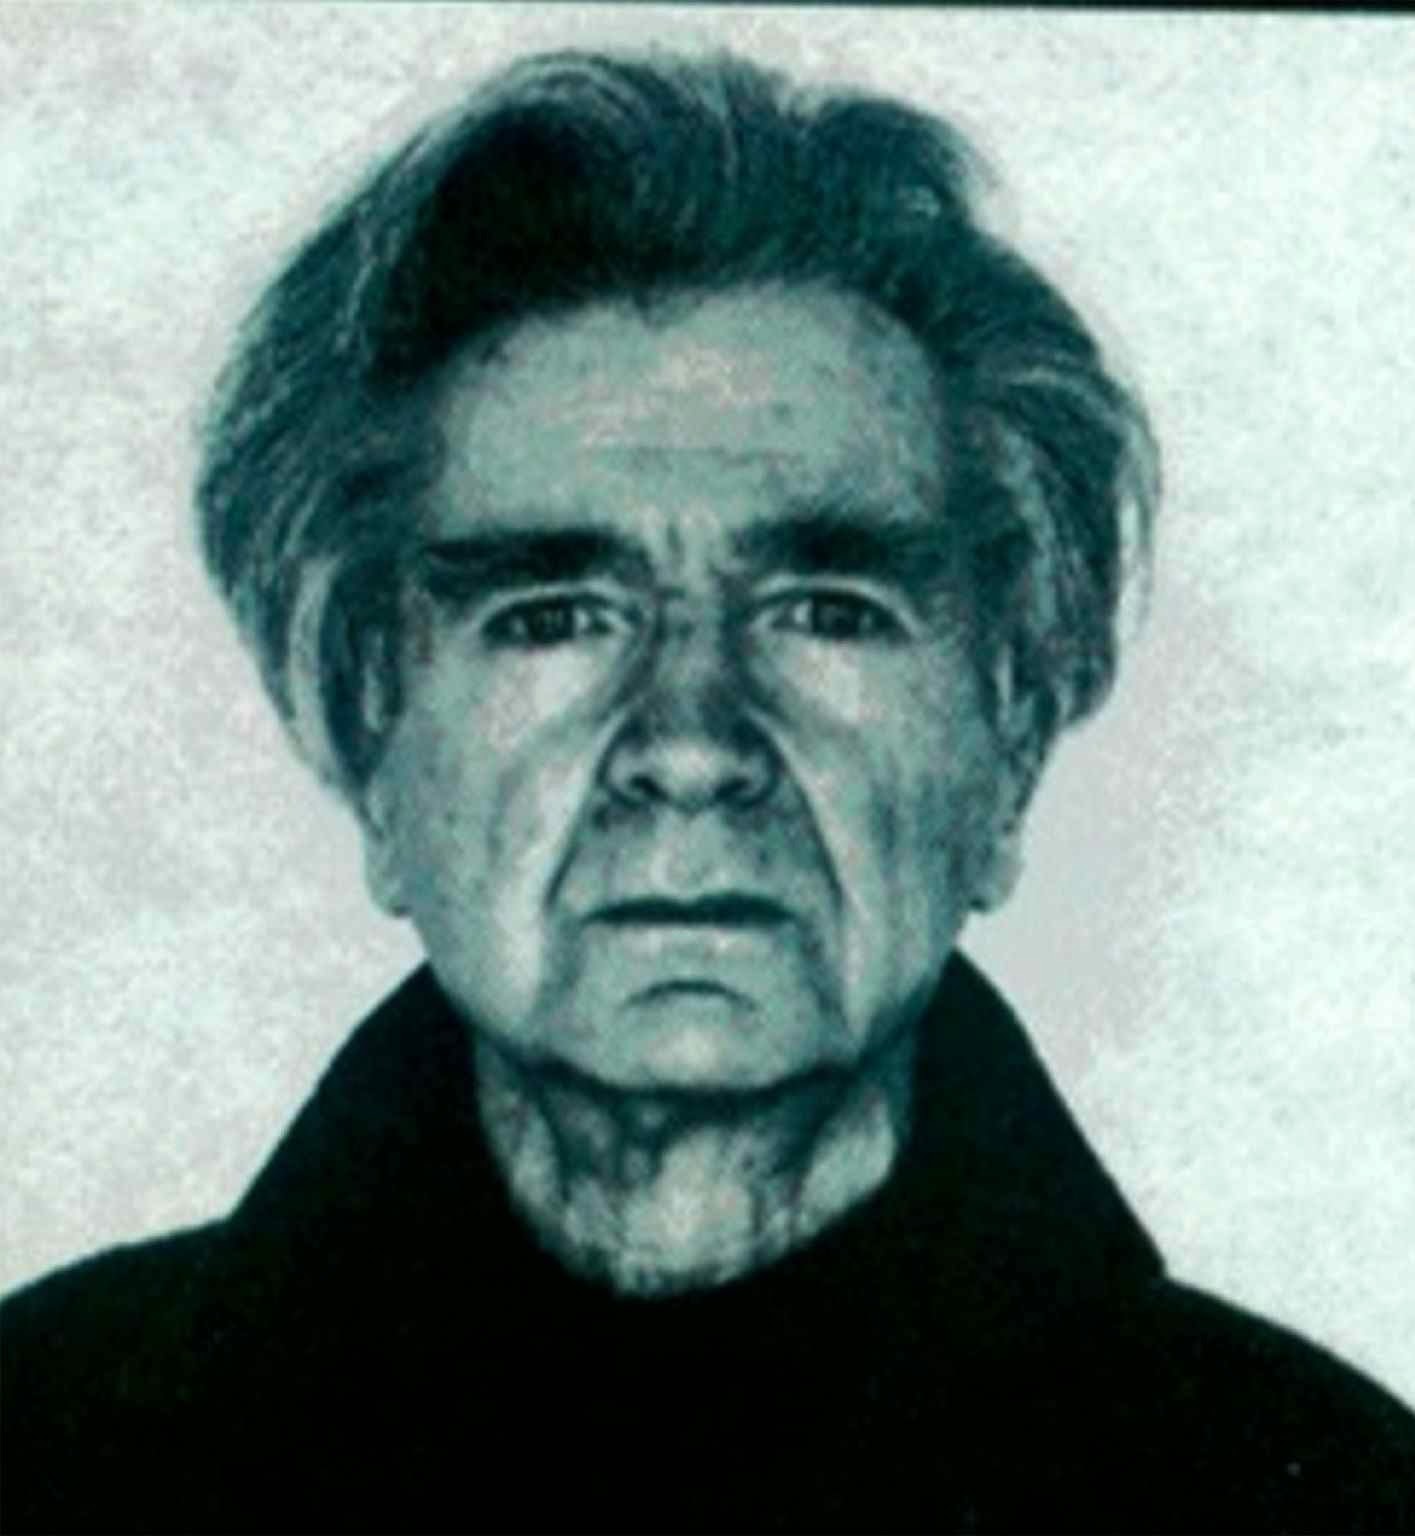 Review: Cioran’s ”A Short History of Decay”